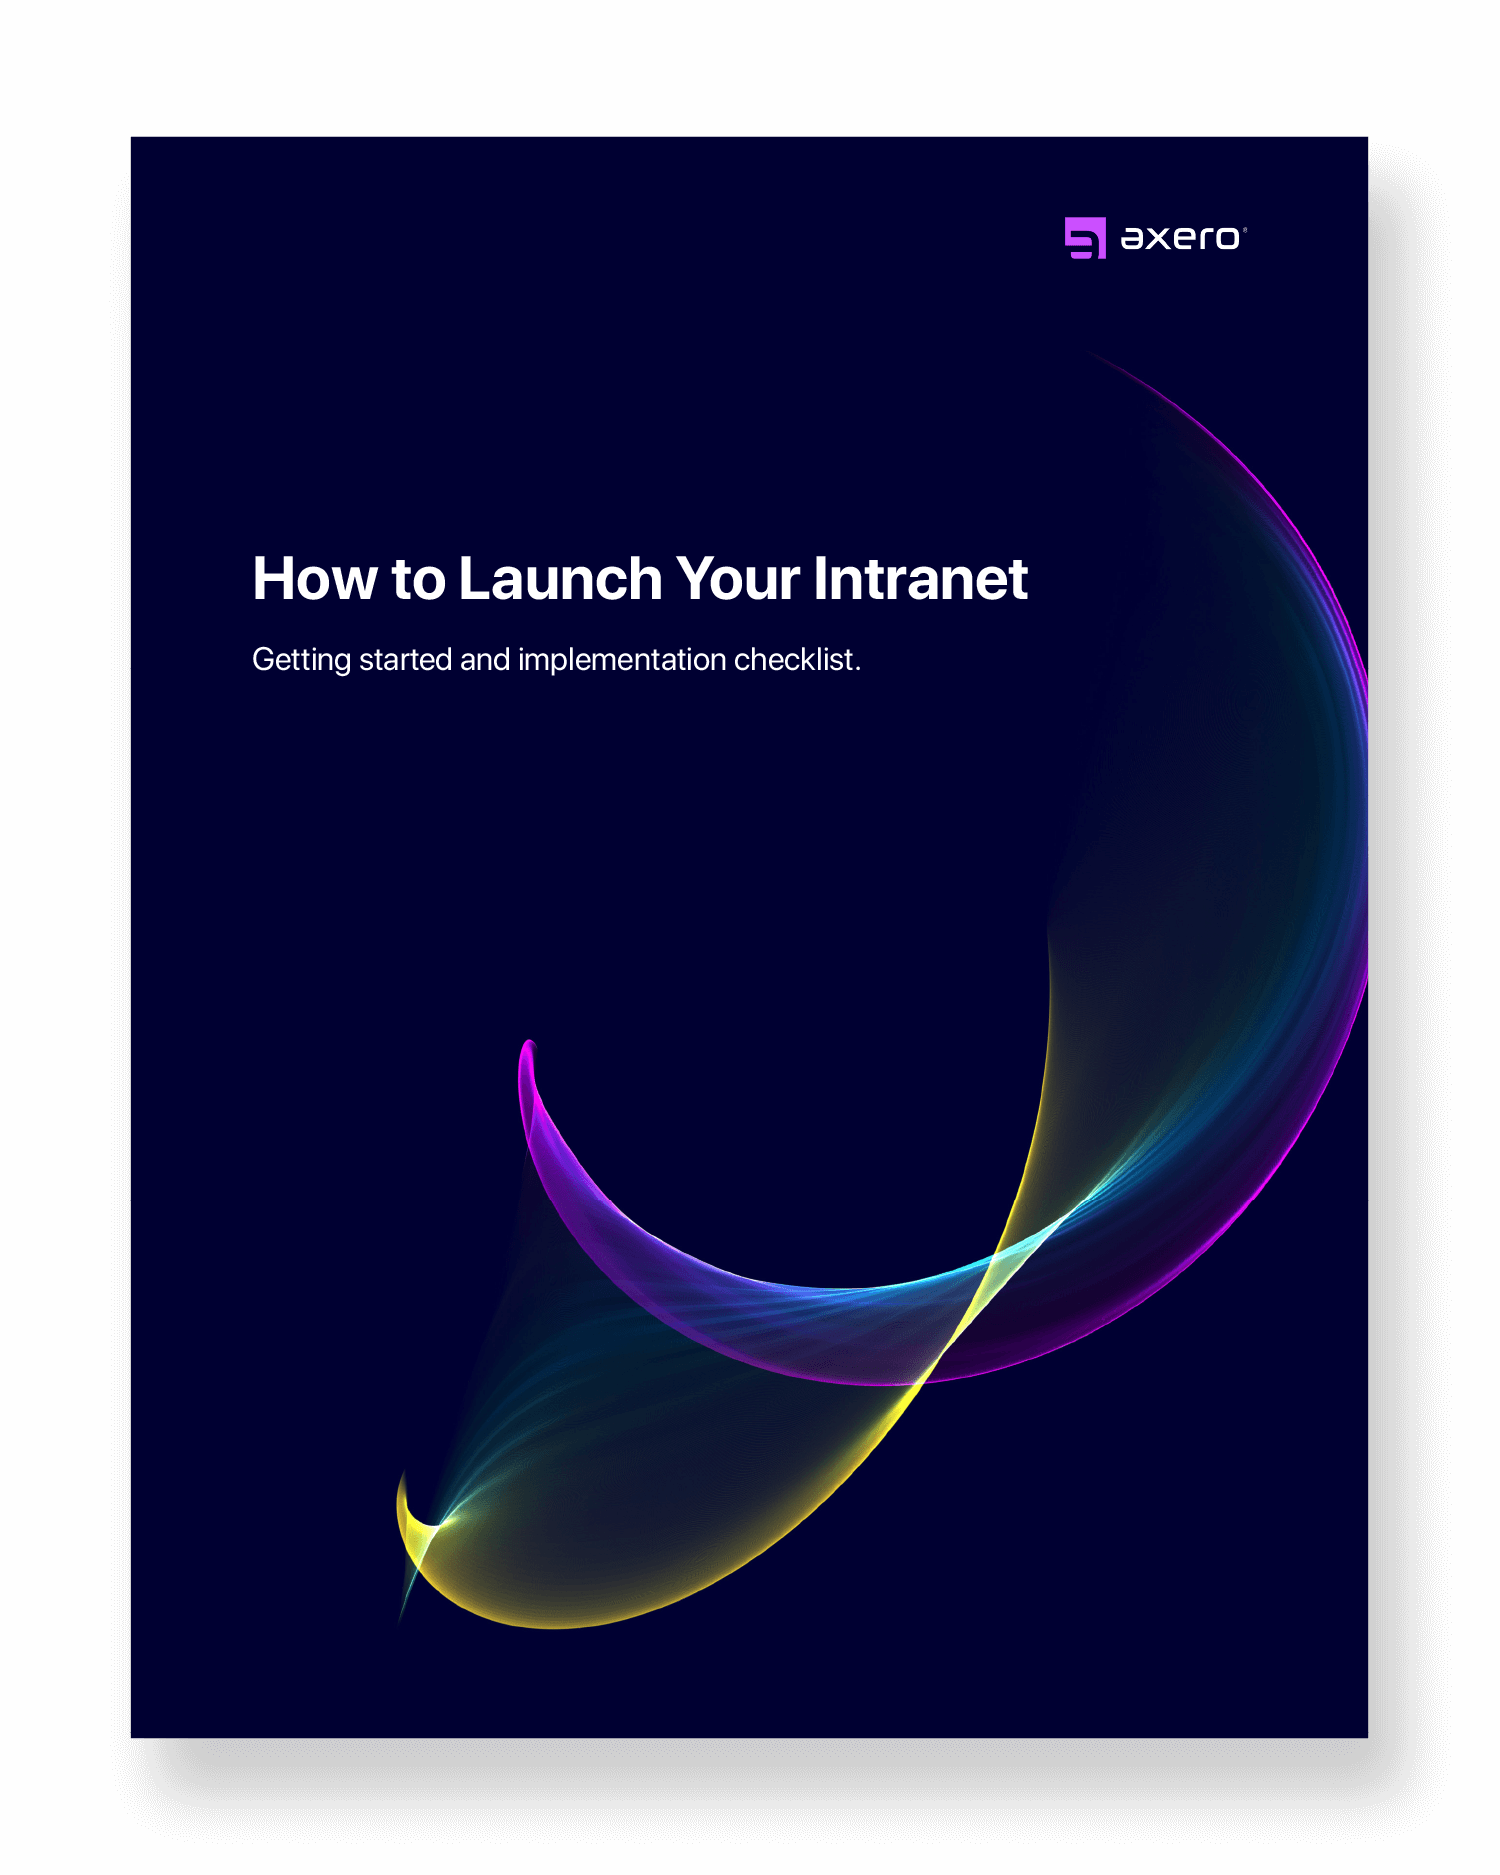 How to Launch an Intranet